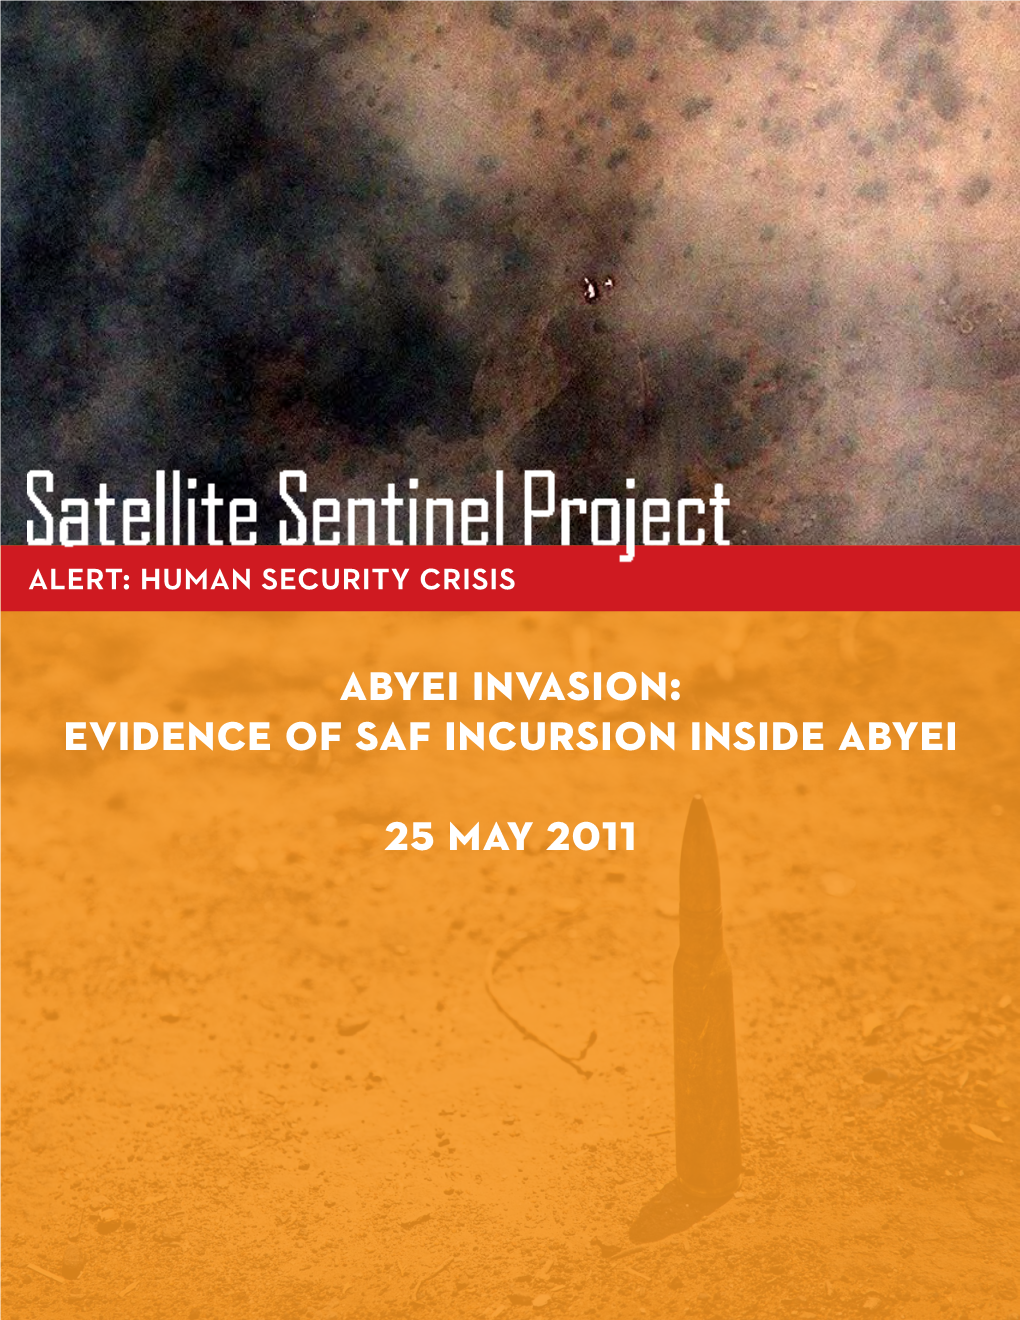 Abyei Invasion: Evidence of Saf Incursion Inside Abyei 25 May 2011 Abyei Invasion: Evidence of Saf Incursion Inside Abyei Alert: Human Security Crisis Prepared By